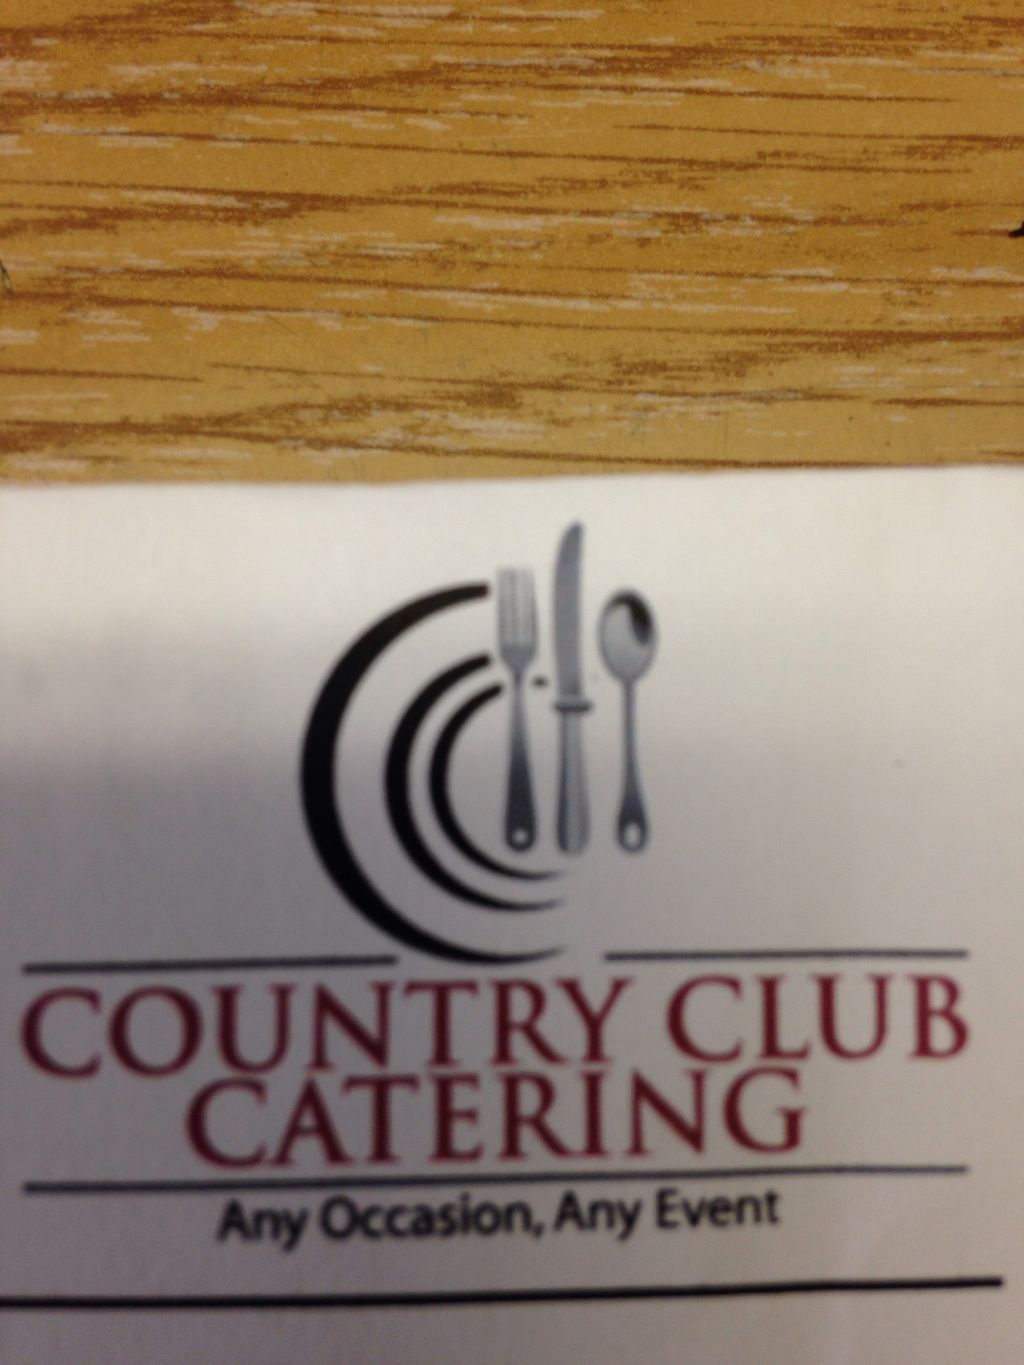 Country Club Catering of WNY Inc.